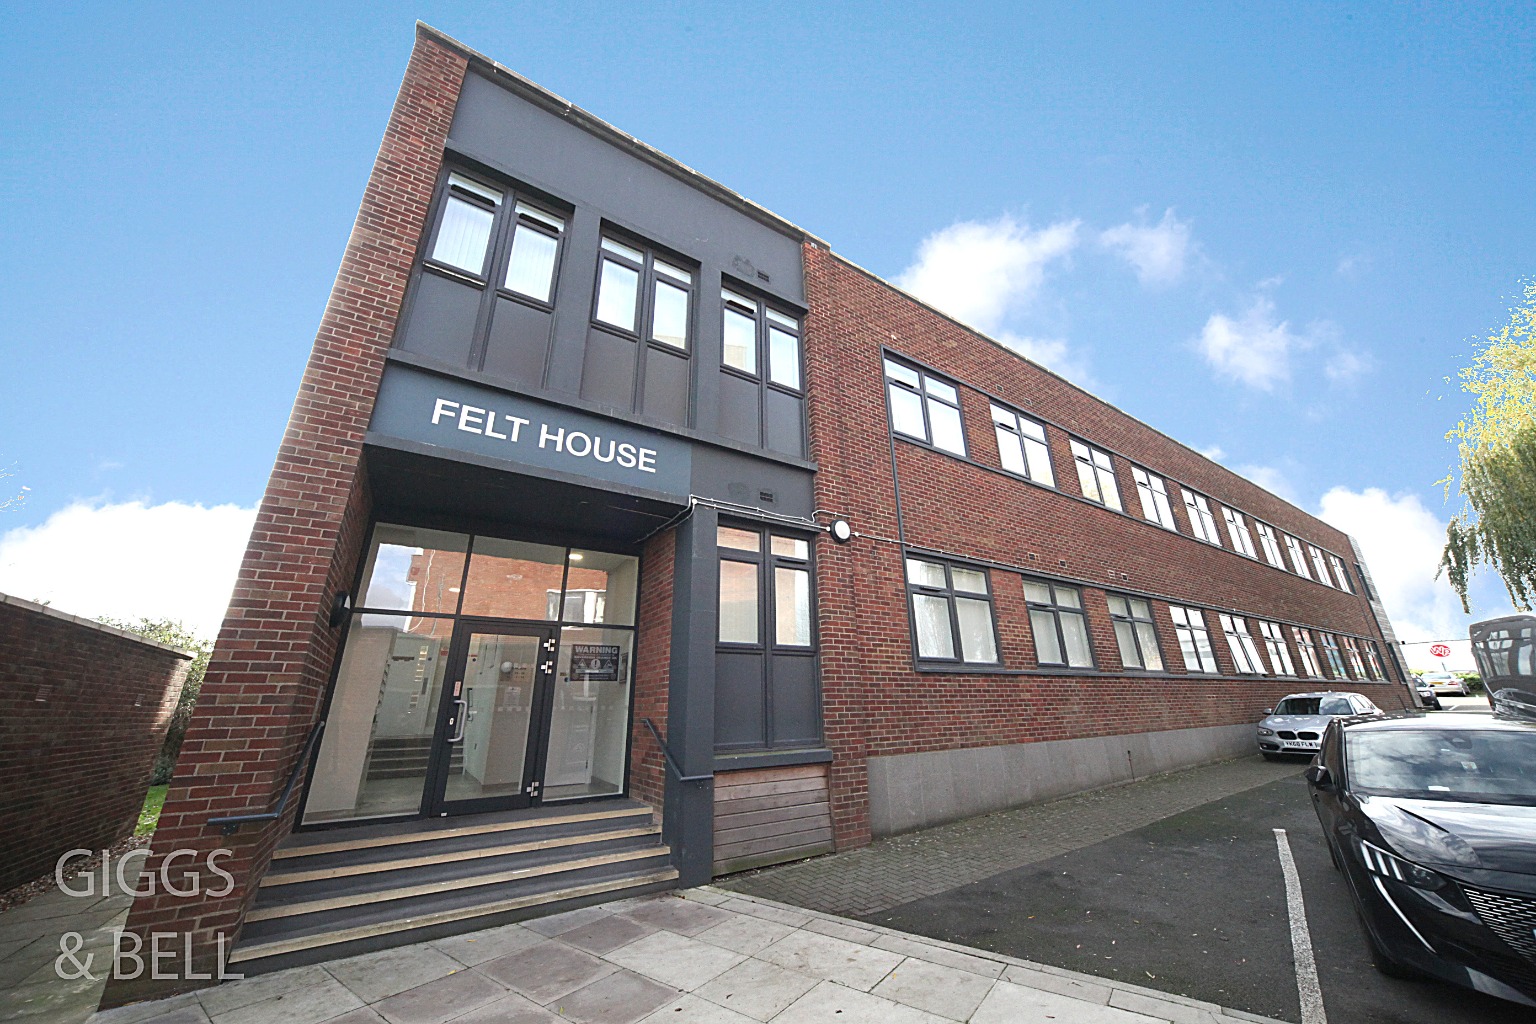 1 bed flat for sale in Laporte Way, Luton - Property Image 1